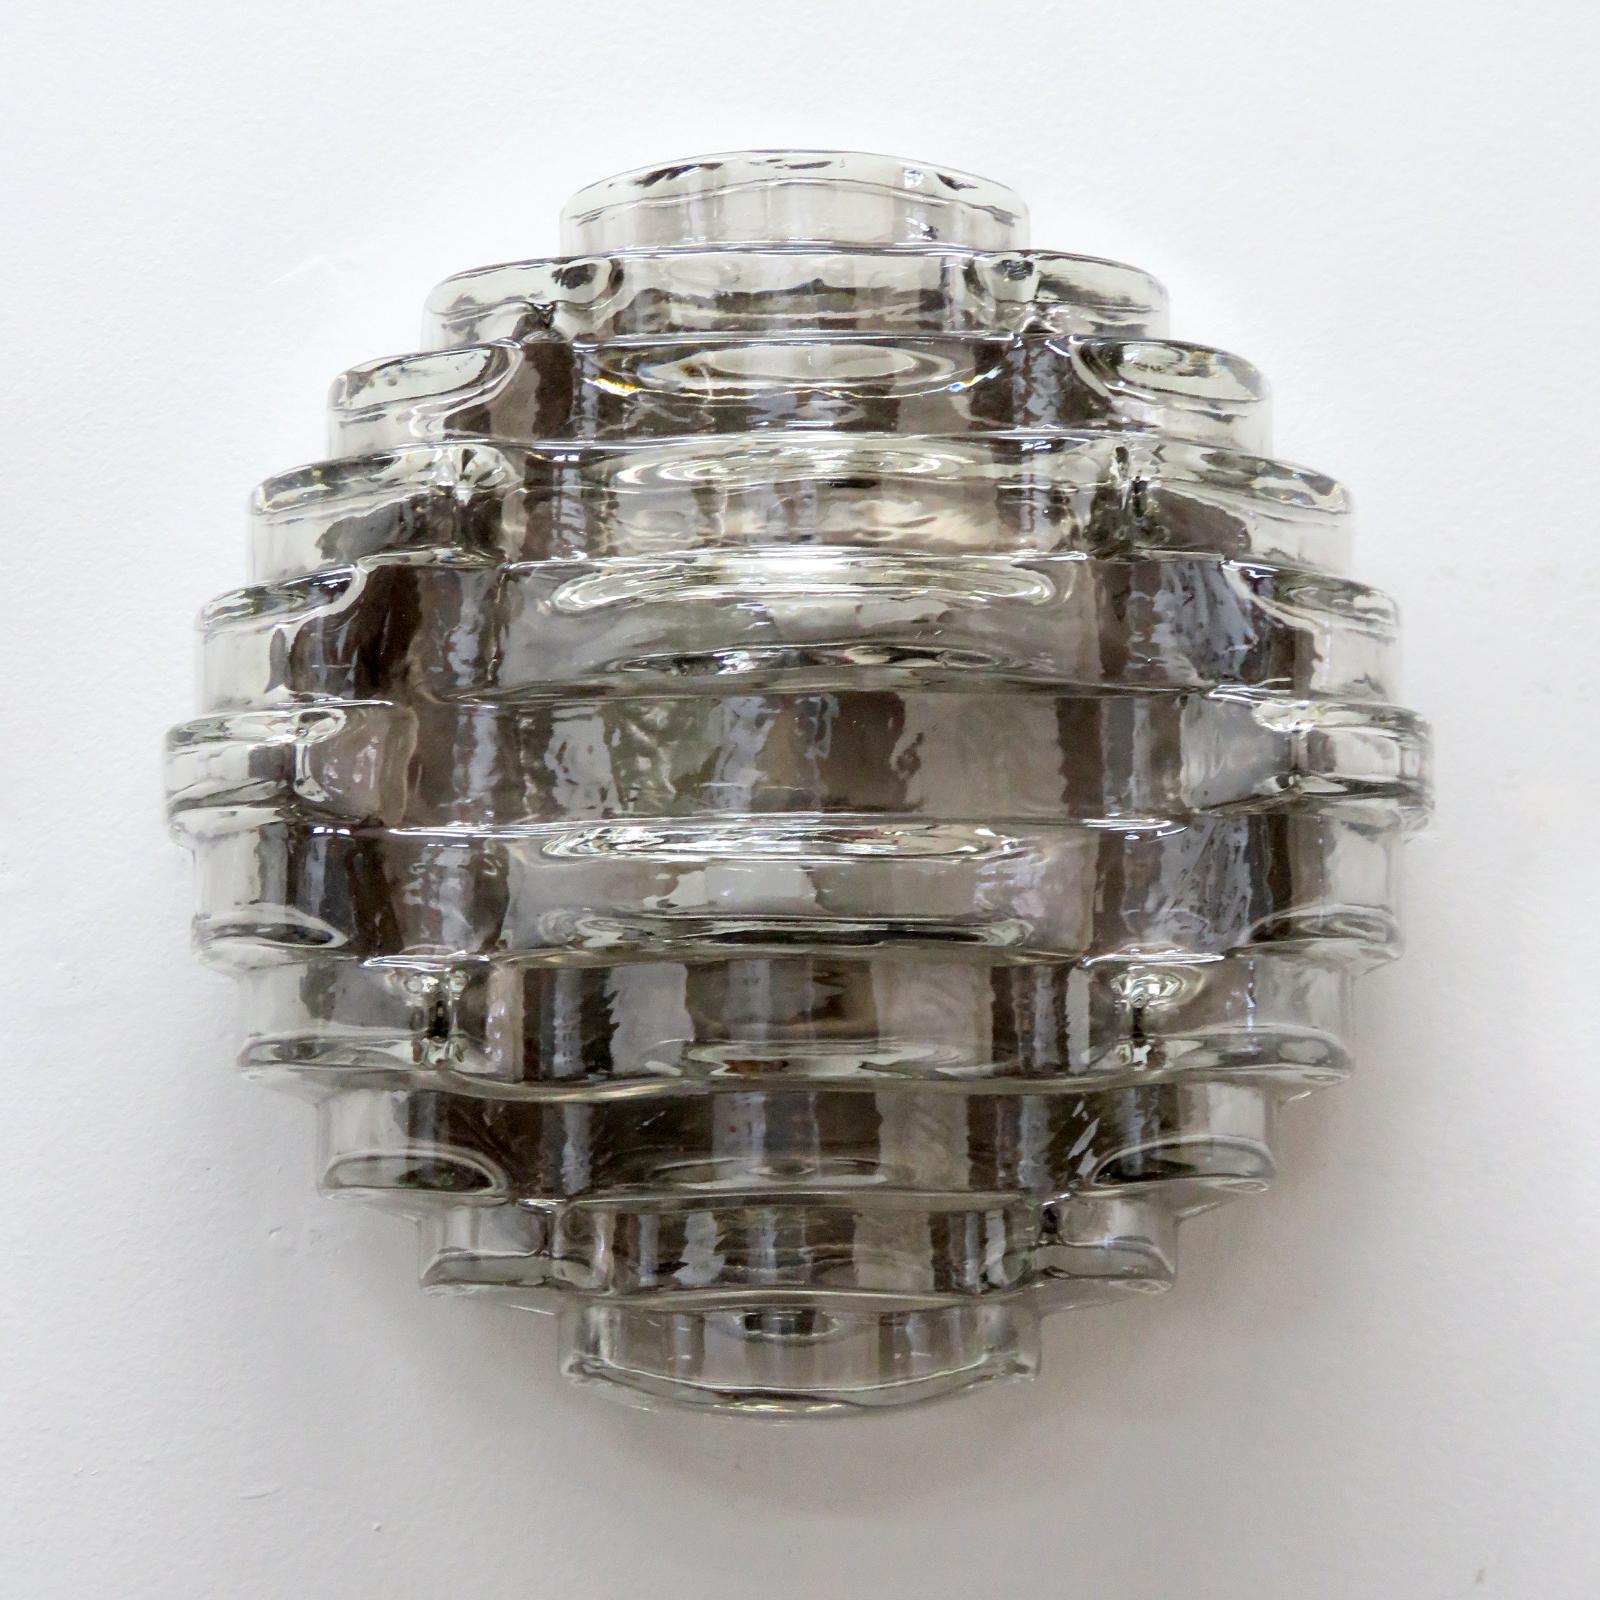 Wonderful heavy, textured smoked glass wall light or flush mount. NOS (new old stock).